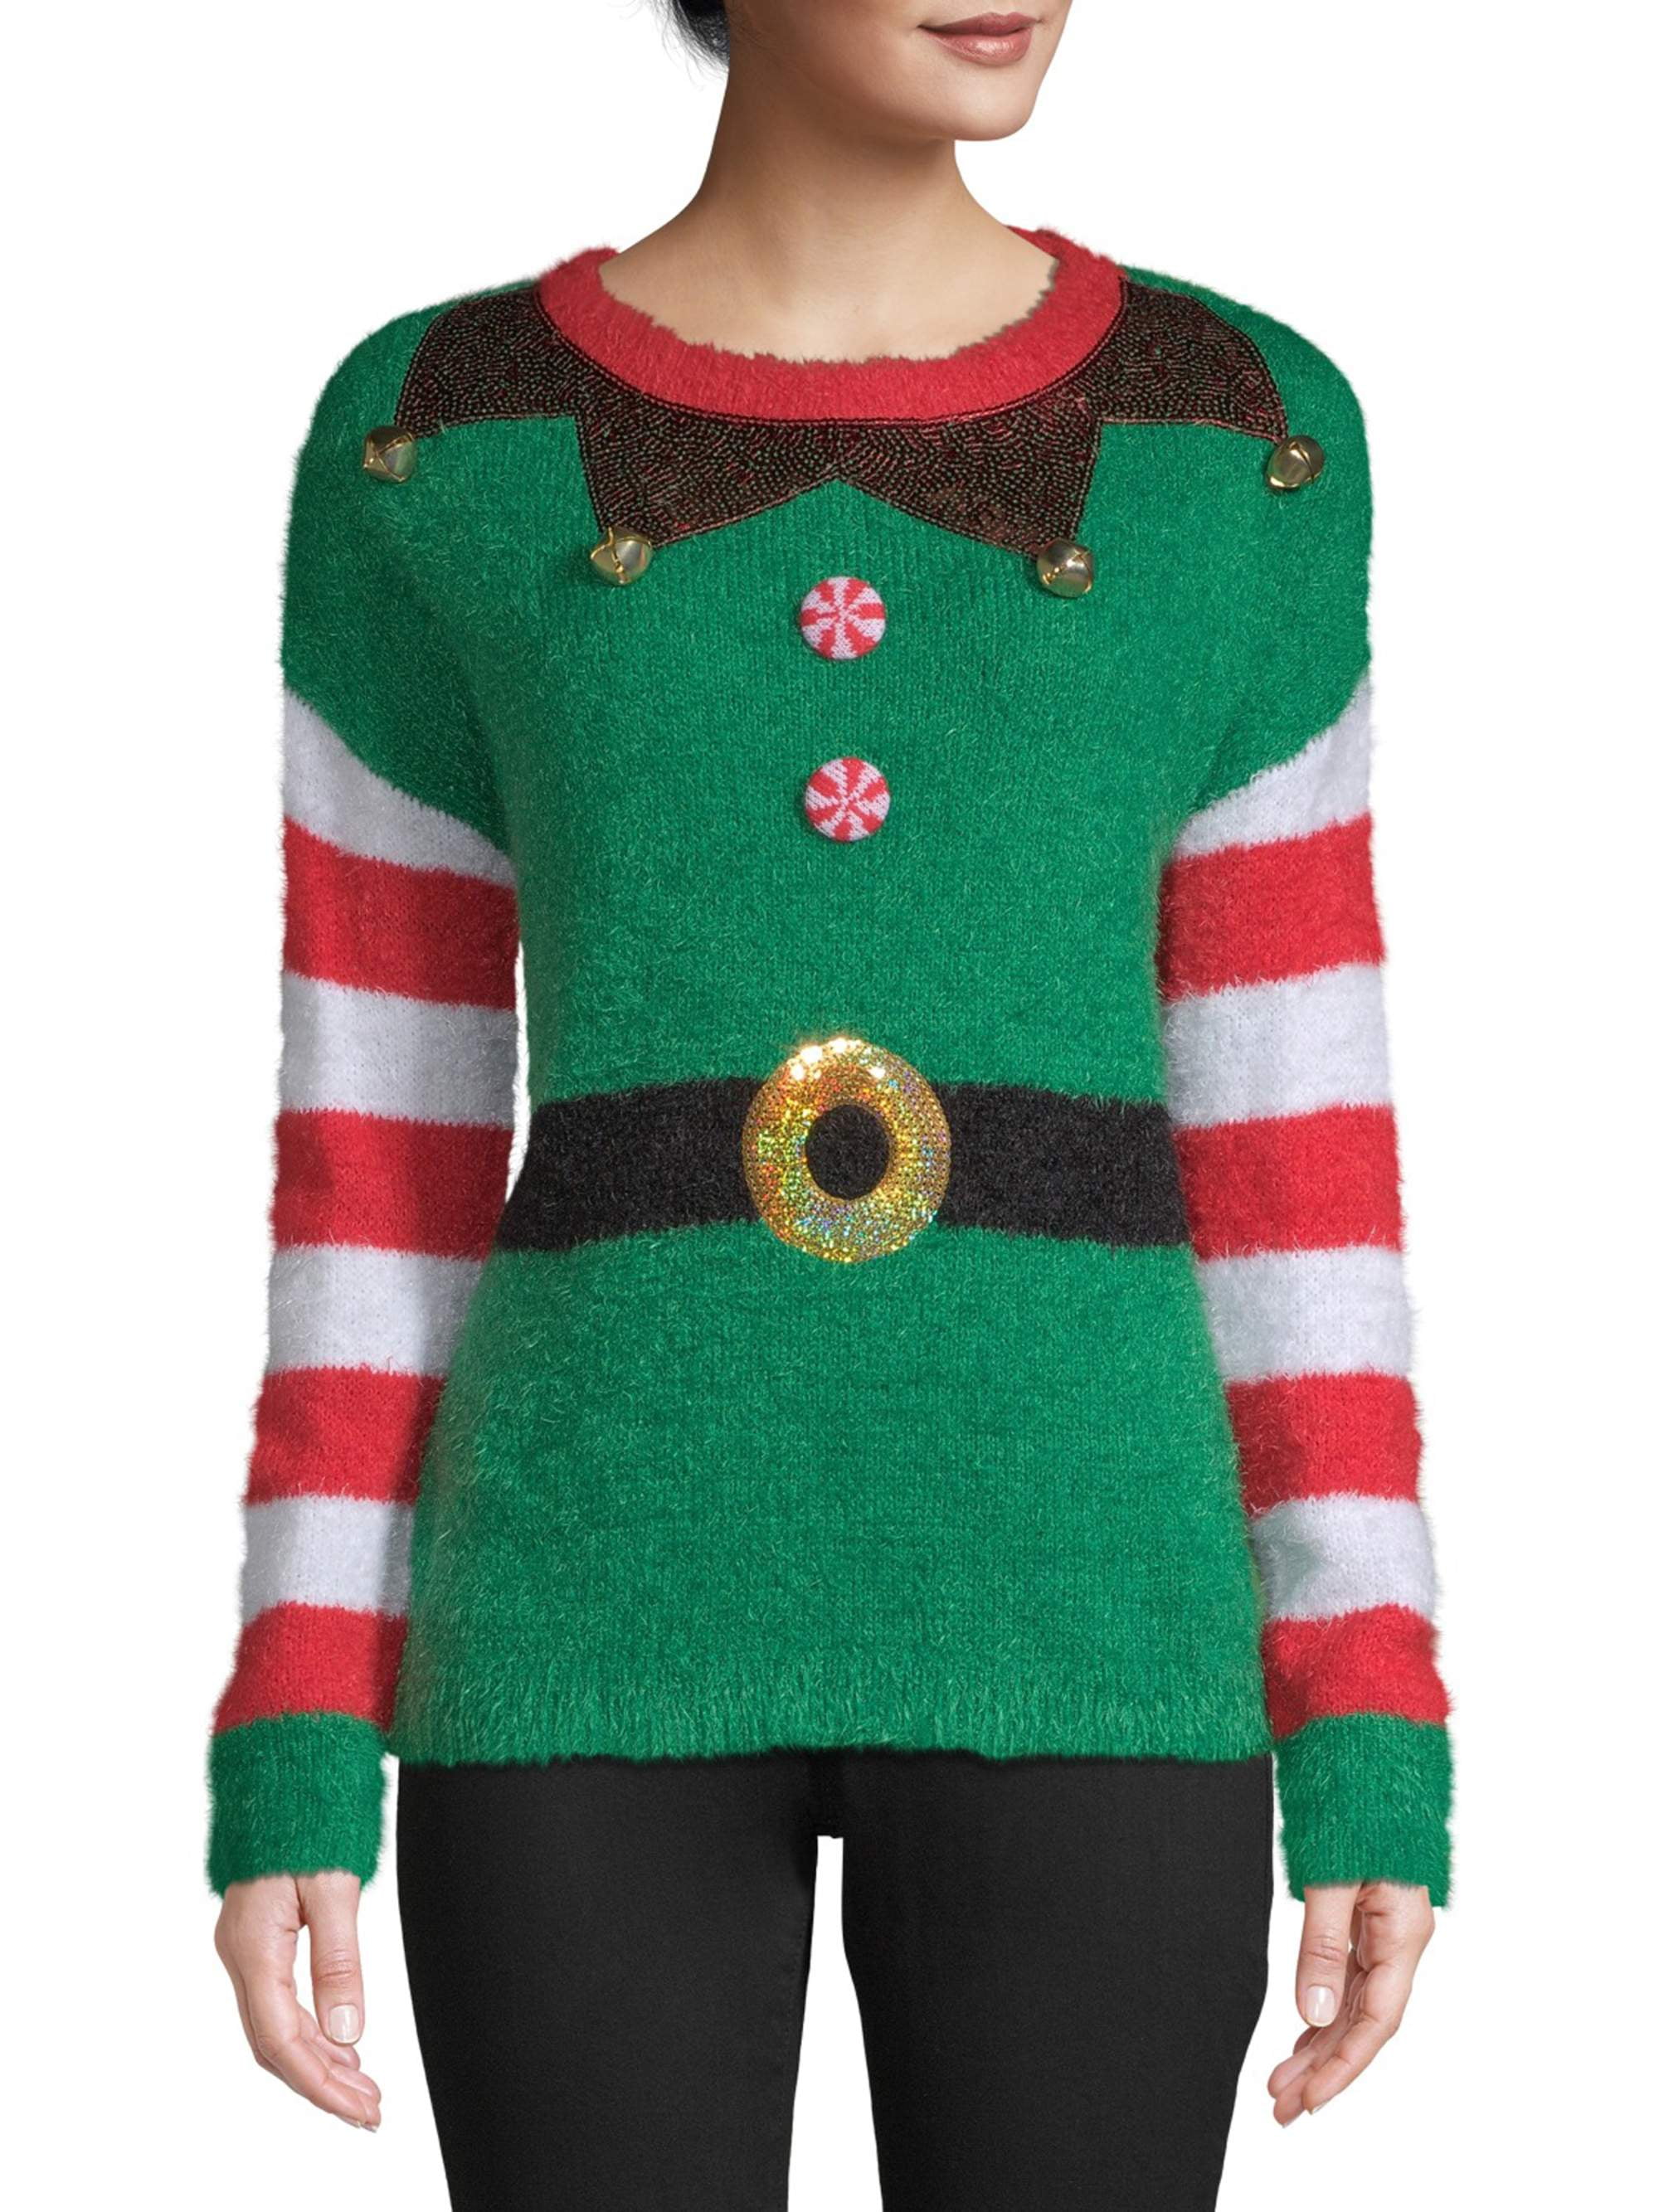 Childs Ugly Christmas Party Sweater Green & Red Elf Sweater 